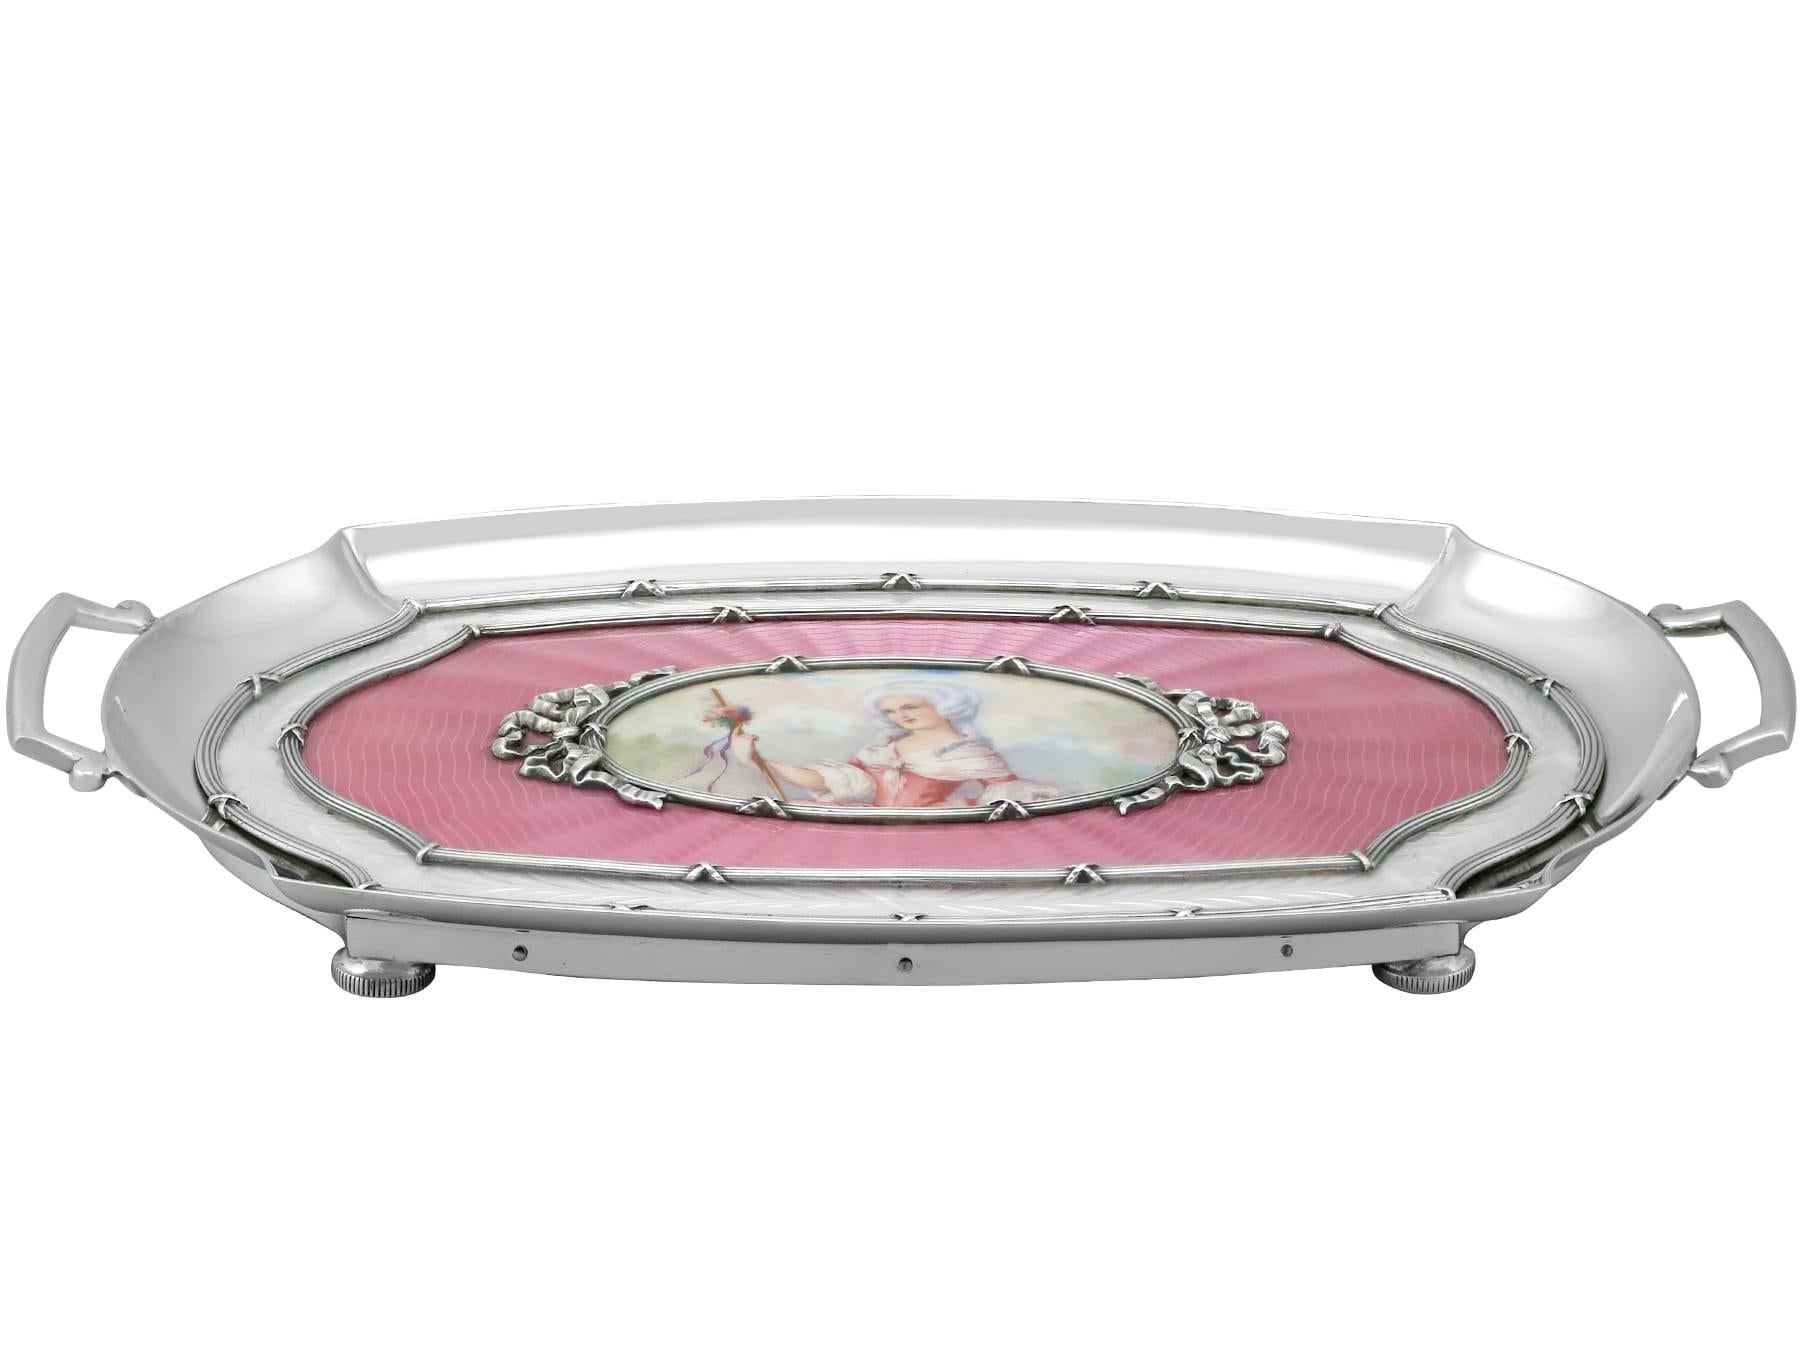 Antique 1920s Austrian Silver and Enamel Boudoir Tray In Excellent Condition For Sale In Jesmond, Newcastle Upon Tyne